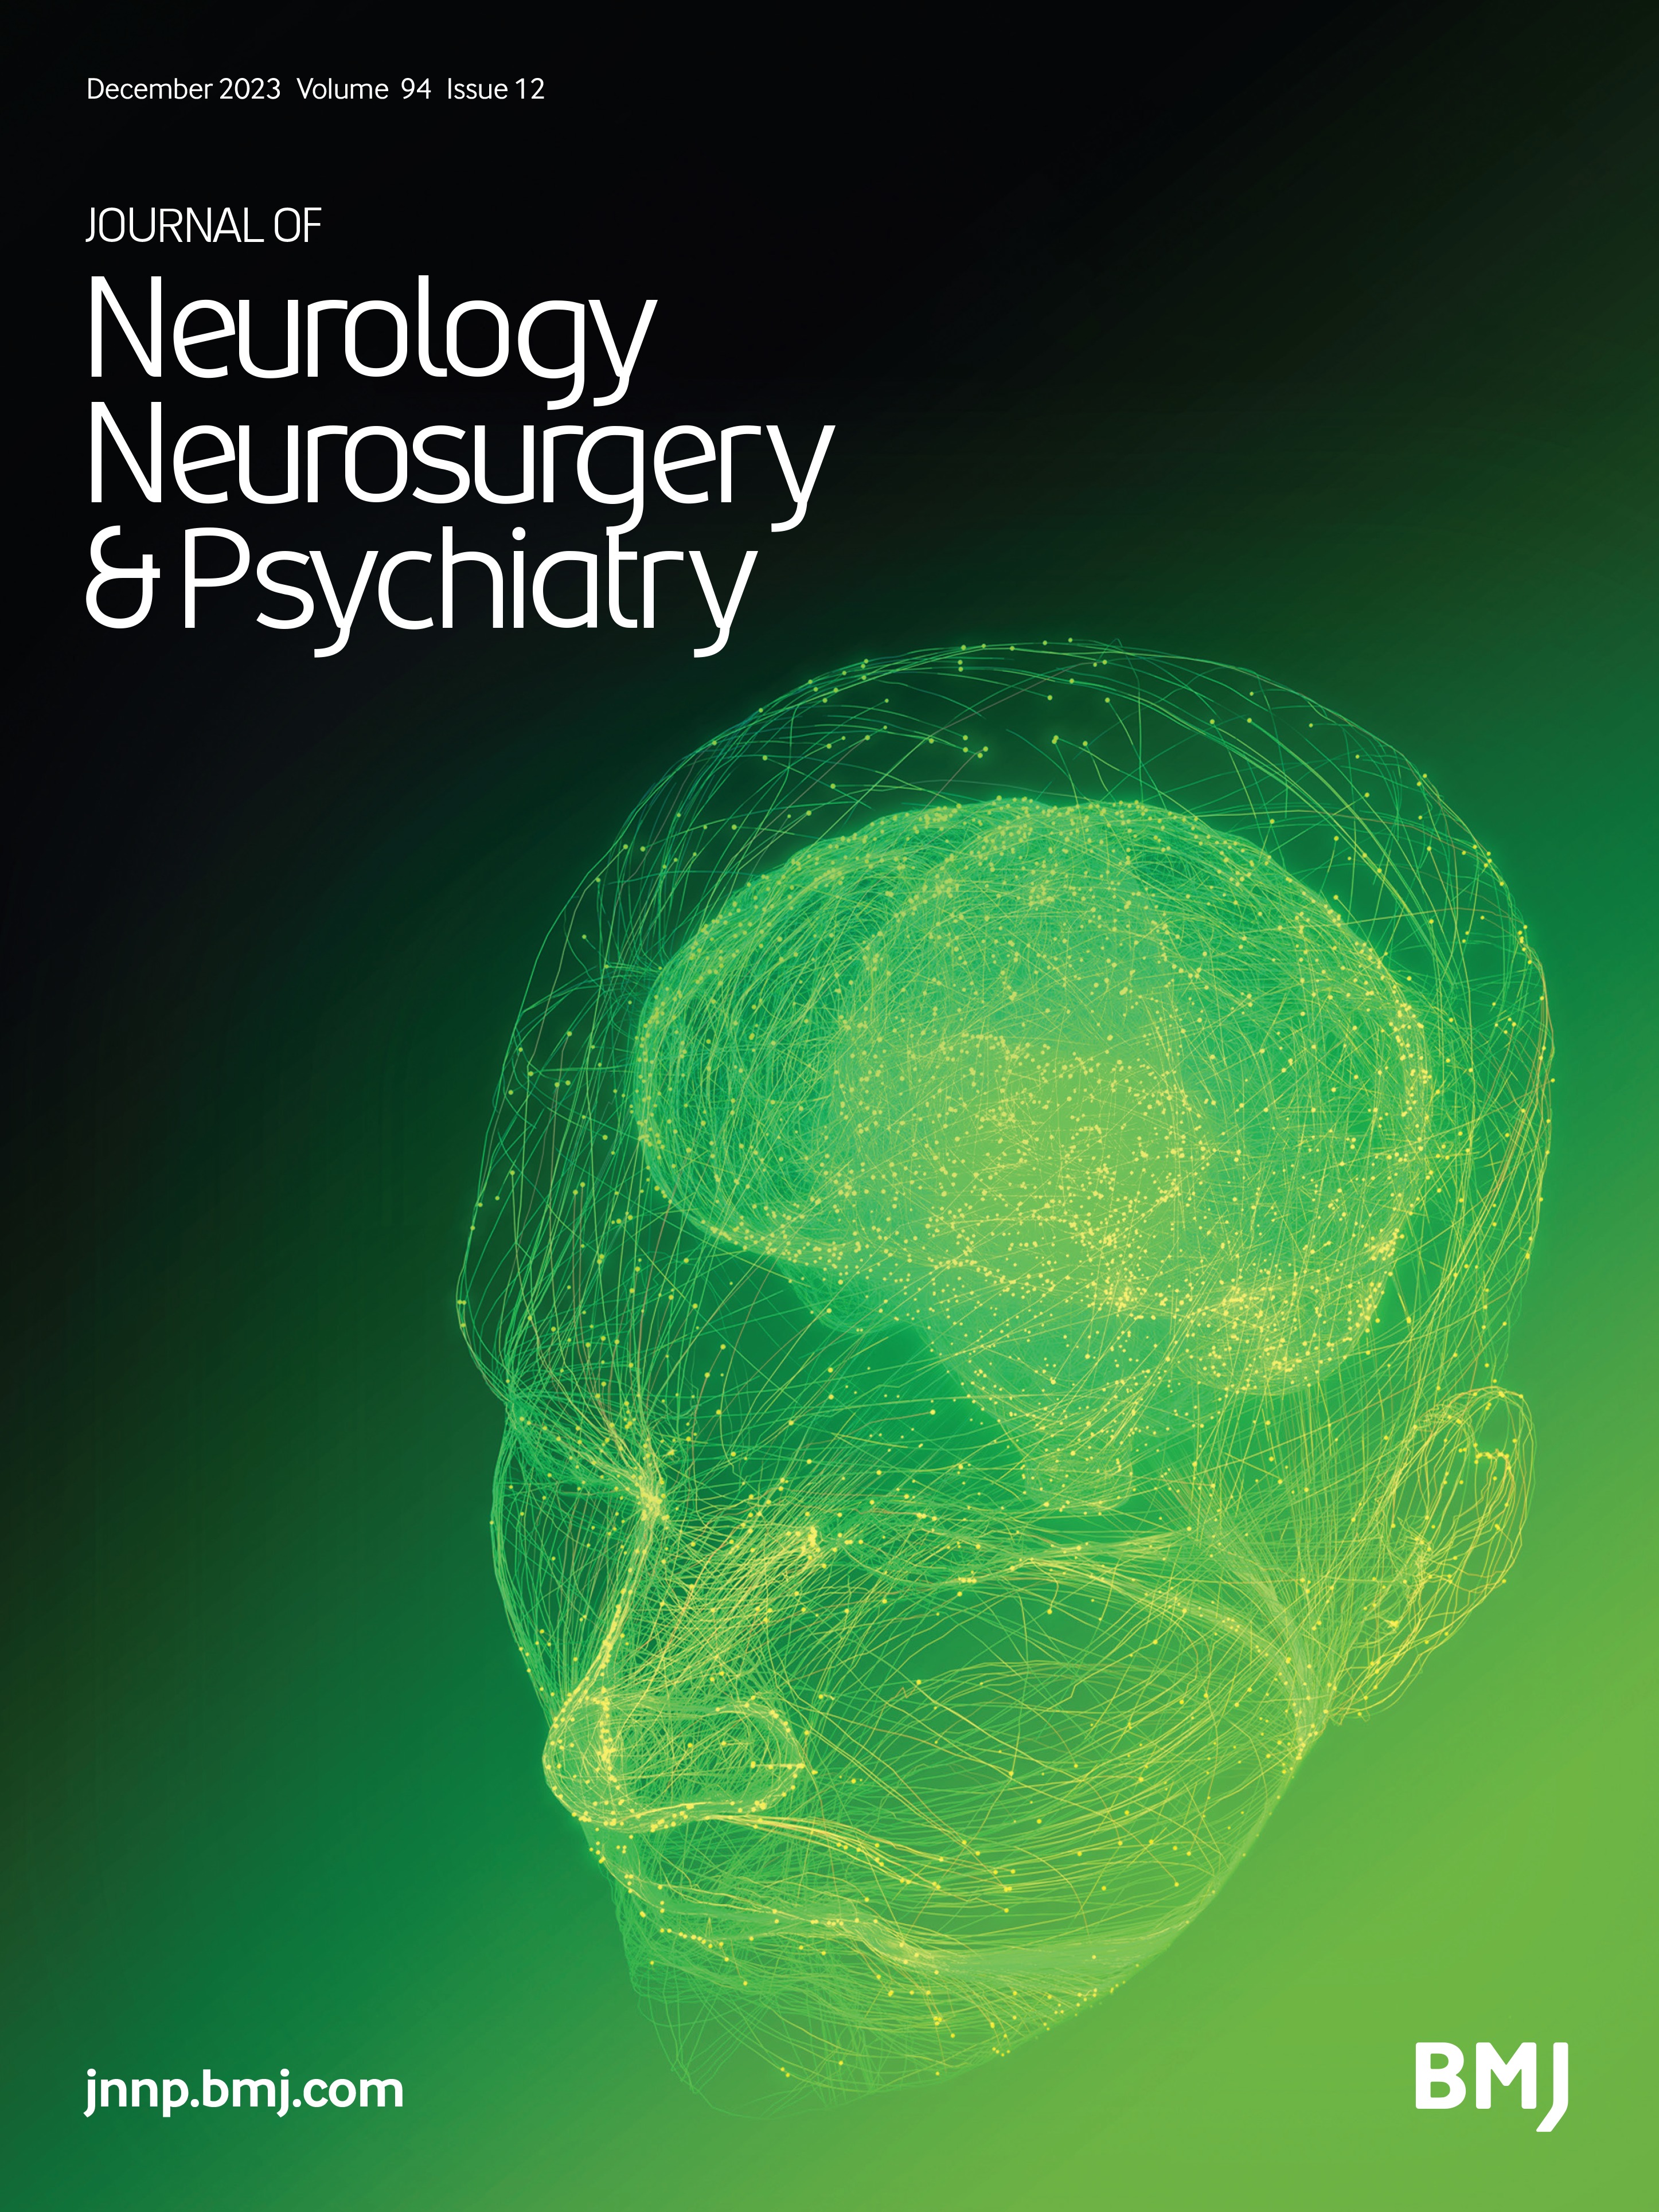 17 The national hospital for neurology and neurosurgeryand functional seizures: a historical perspective using a collective case analysis of archived records from 1863 to 1945